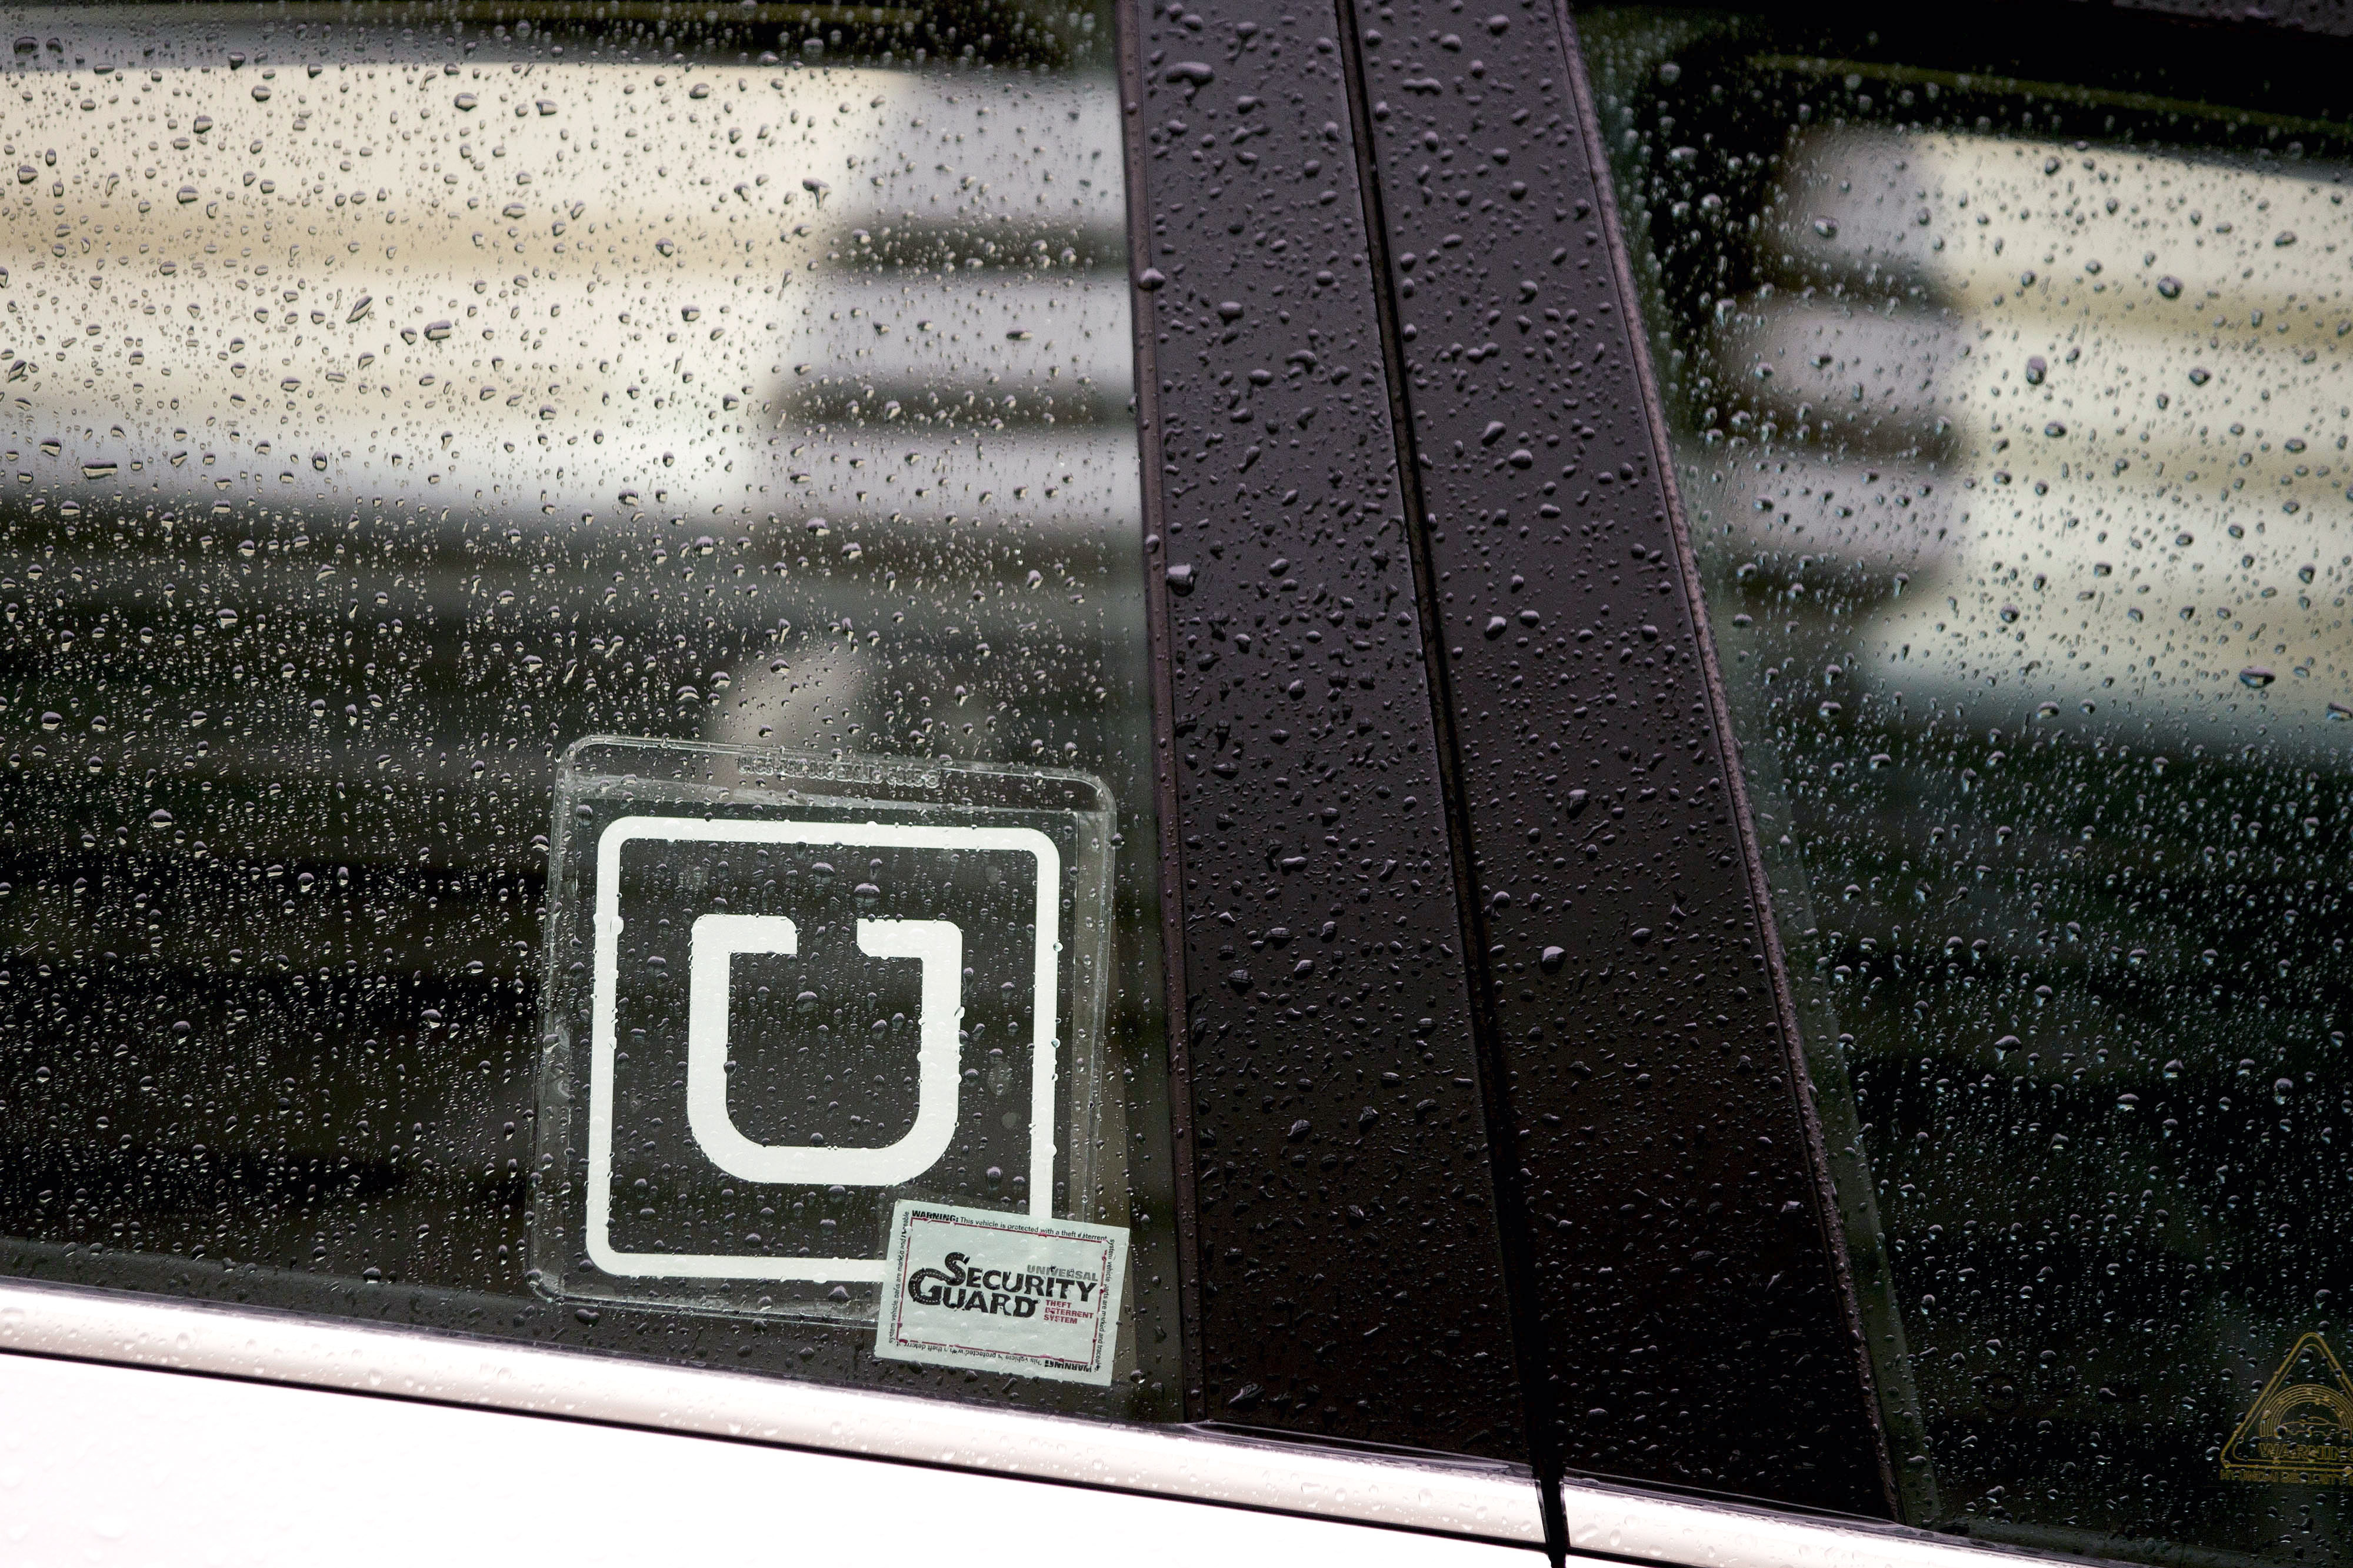 The Uber Technologies Inc. logo is displayed on the window of a vehicle after dropping off a passenger at Ronald Reagan National Airport (DCA) in Washington, D.C., U.S., on Wednesday, Nov. 26, 2014. (Andrew Harrer—Bloomberg/Getty Images)